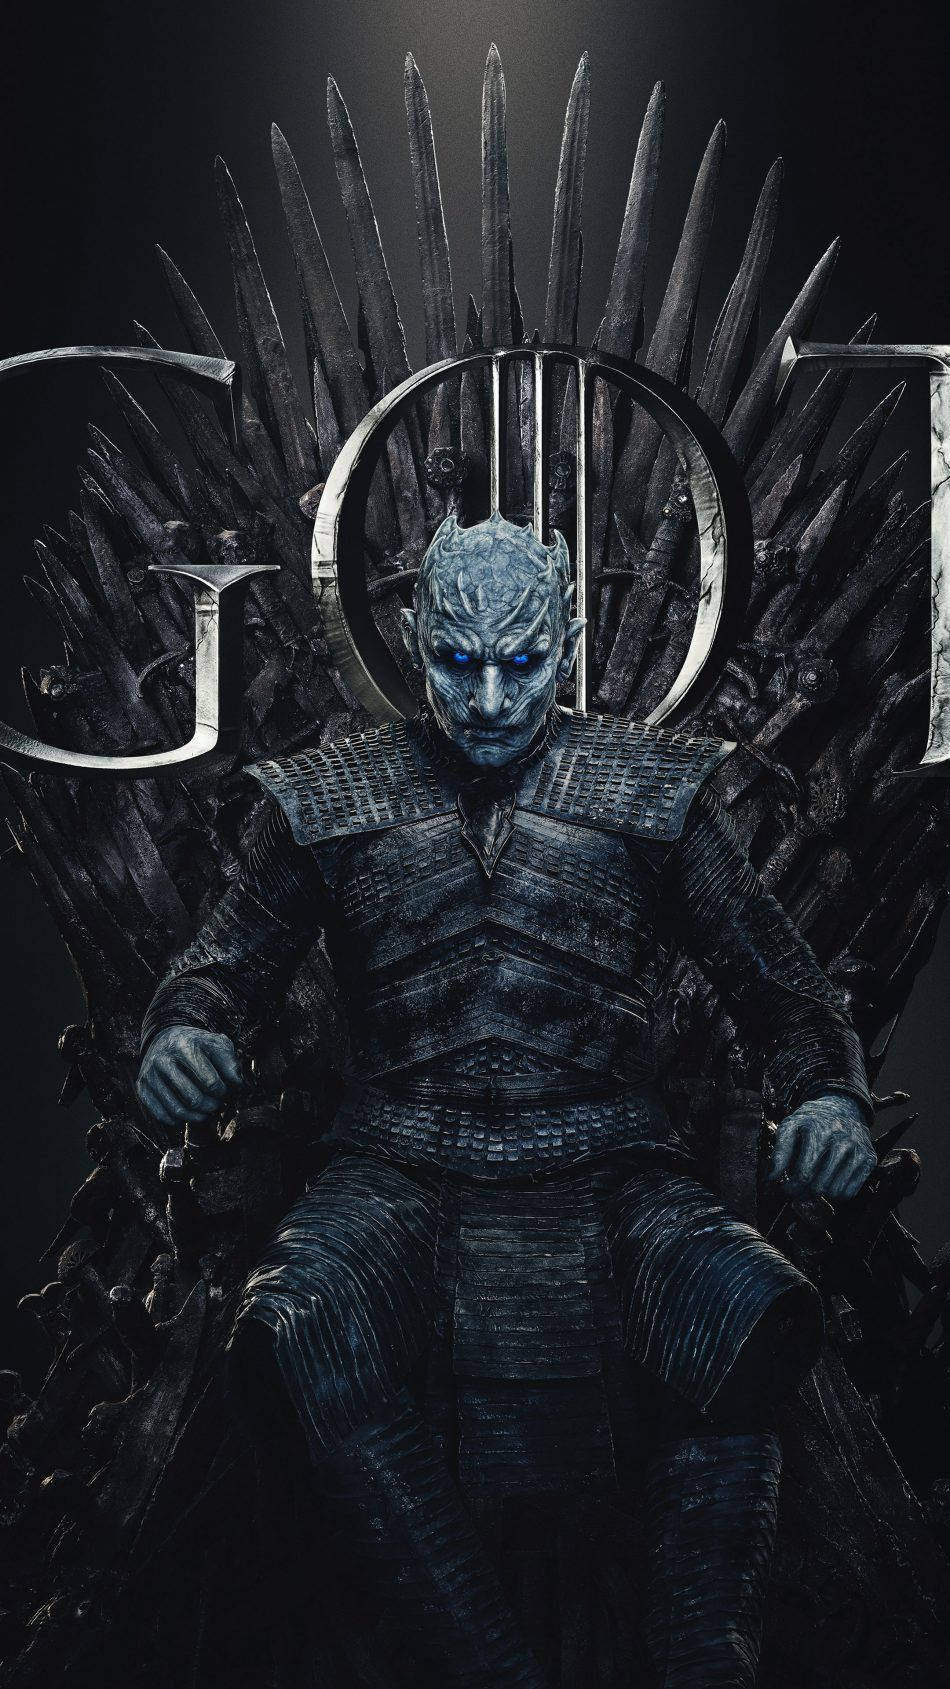 Game Of Thrones Season 8 Night Throne Picture